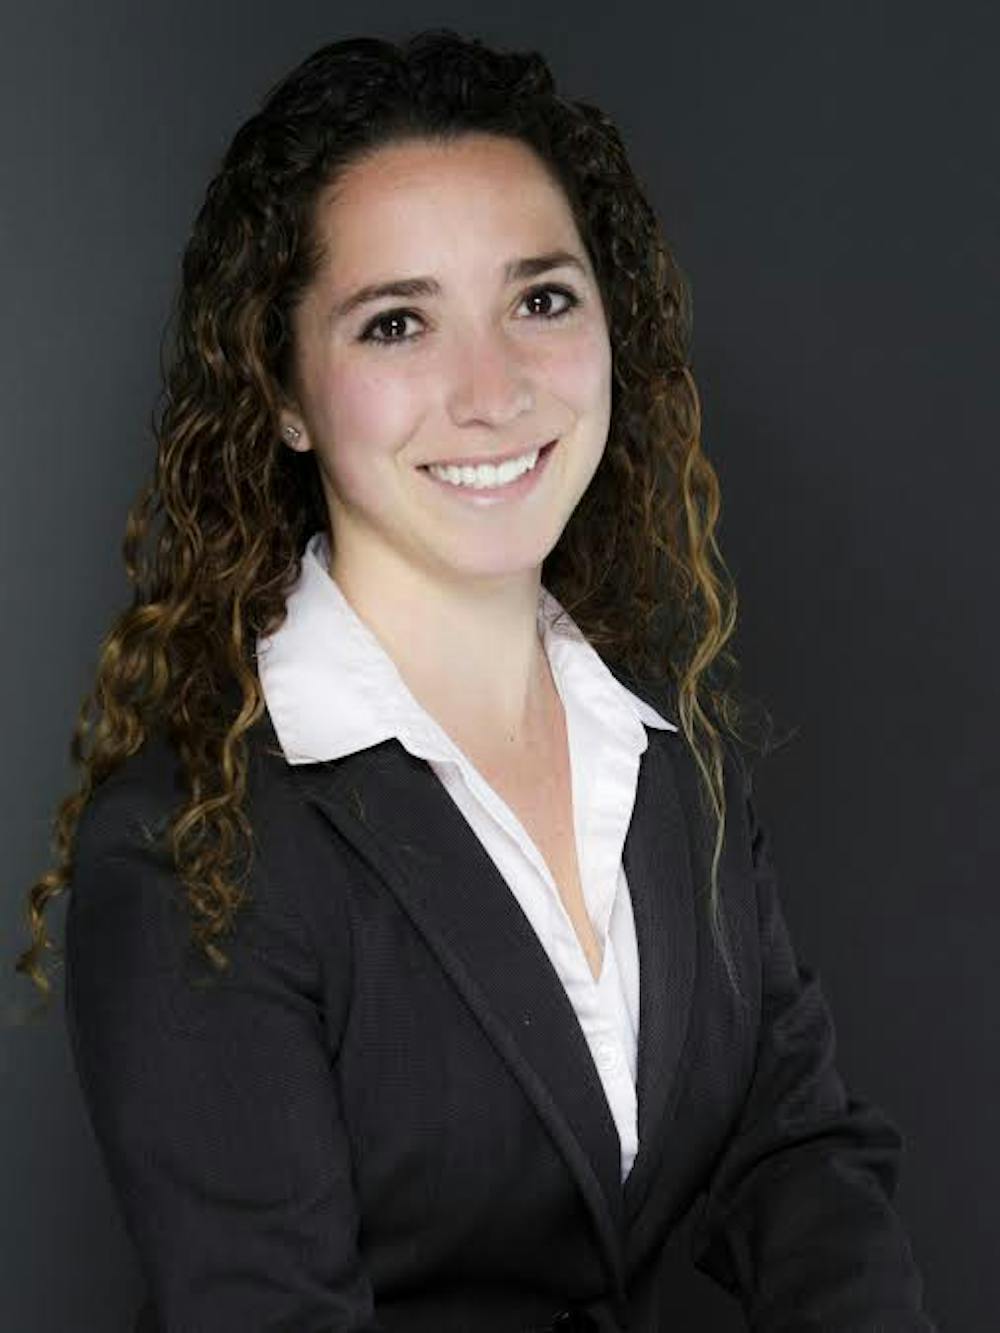 <p>Chaillo is the current president of the Commerce School Council and serves on the Executive Committee for the Hoo Crew, which she has been on for three years.</p>